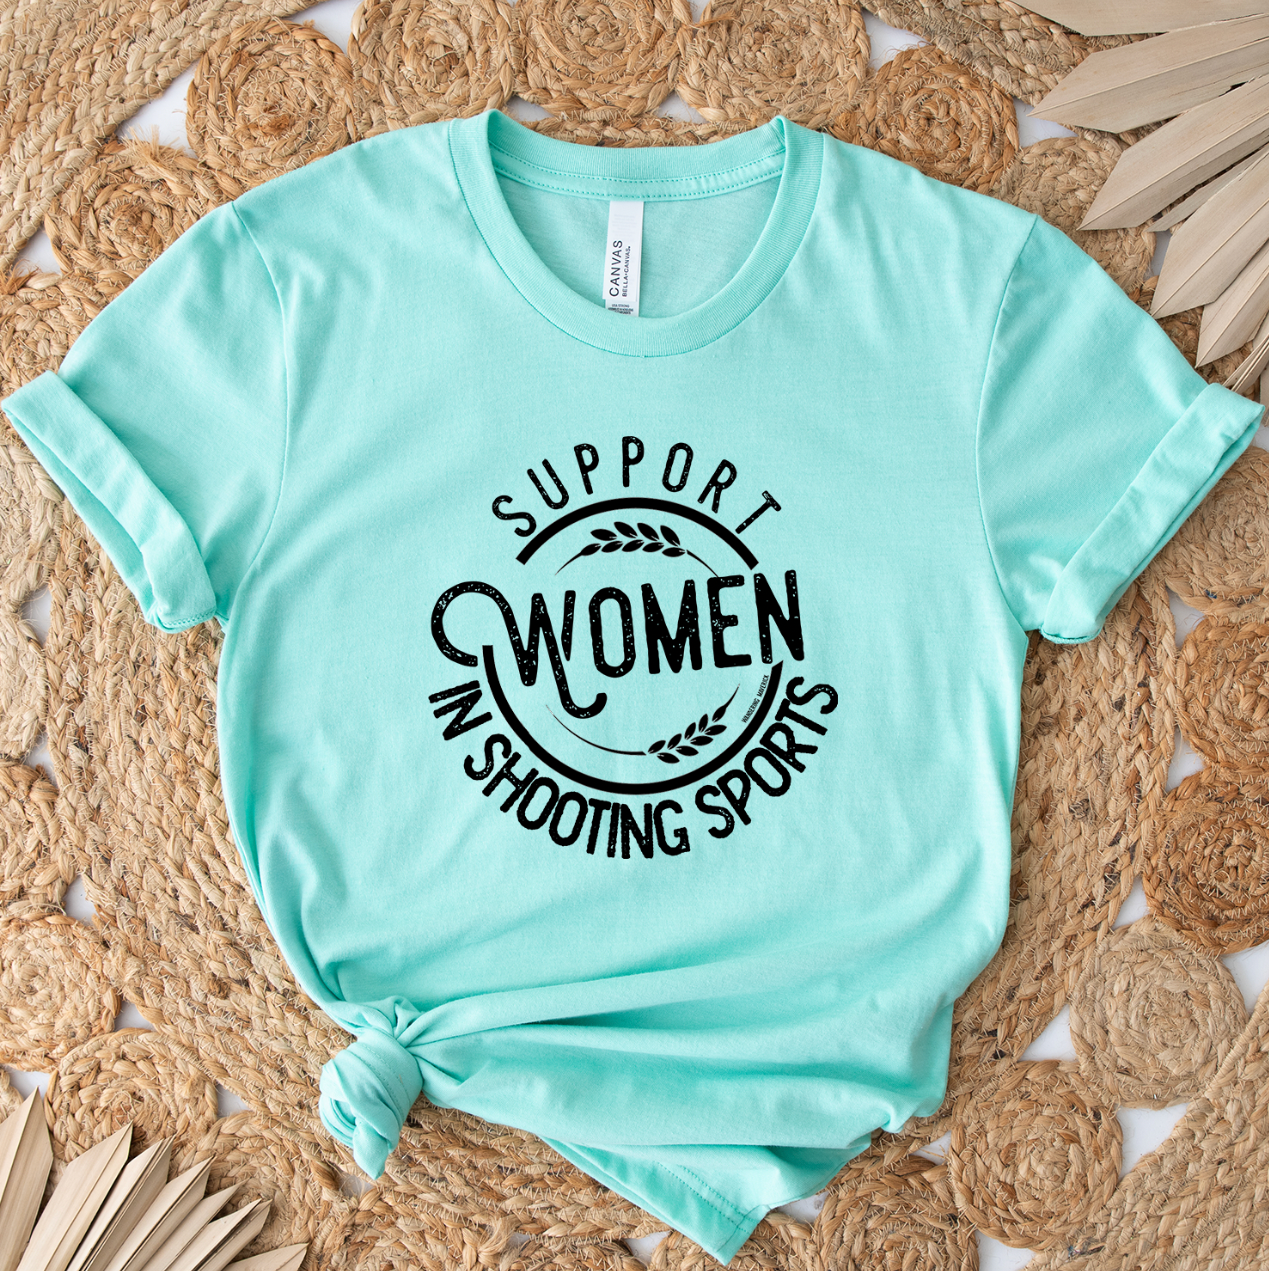 Support Women In Shooting Sports T-Shirt (XS-4XL) - Multiple Colors!